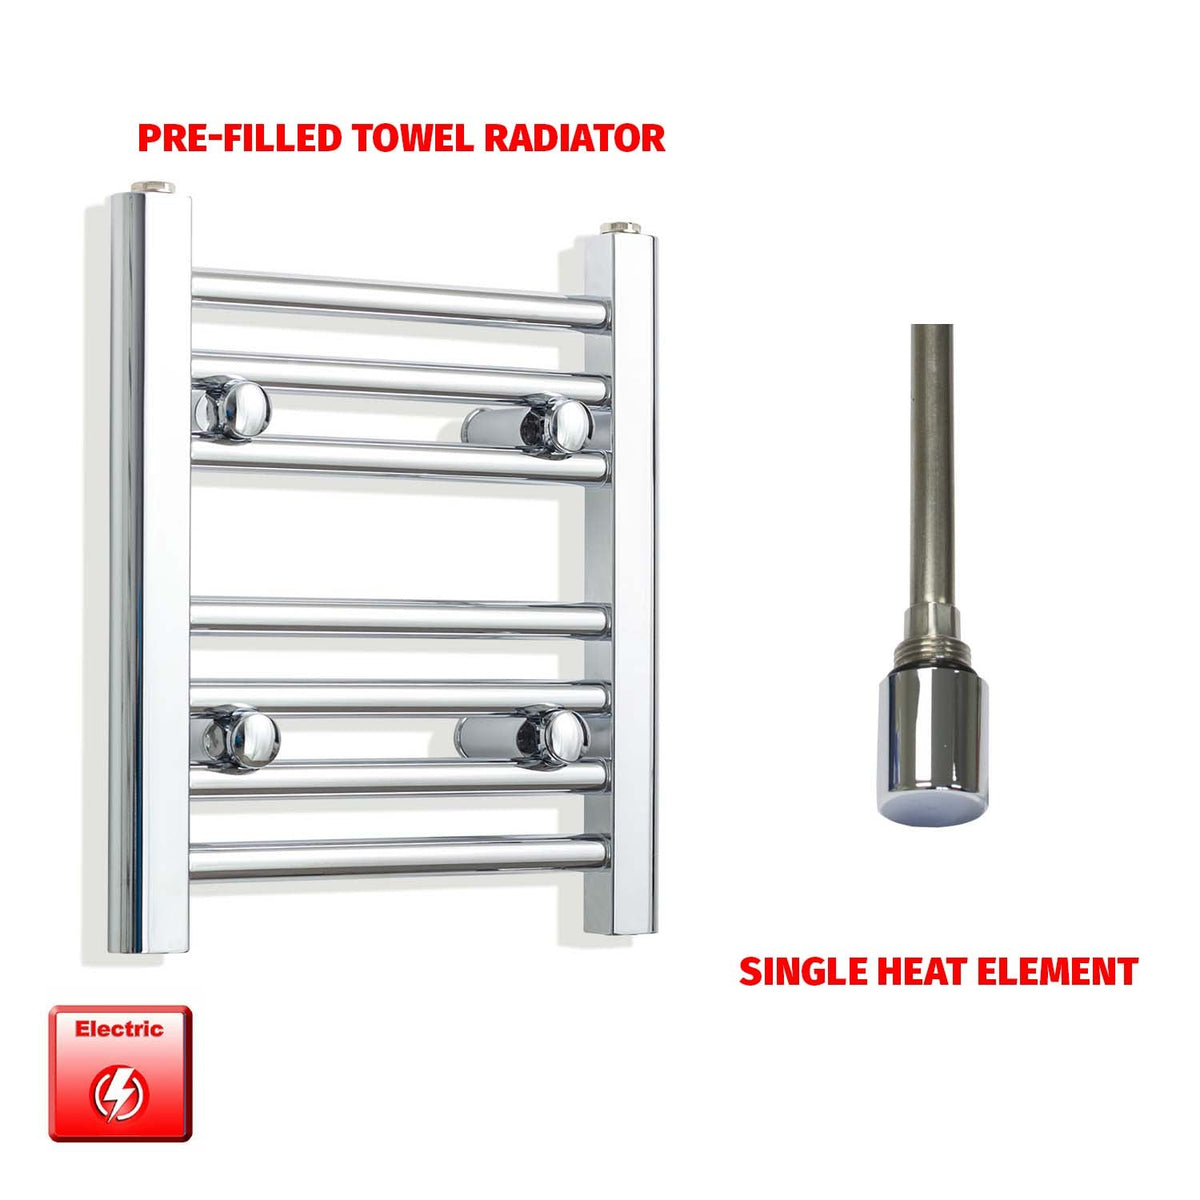 400mm High 300mm Wide Pre-Filled Electric Heated Towel Rail Radiator Straight Chrome Single Element No Timer